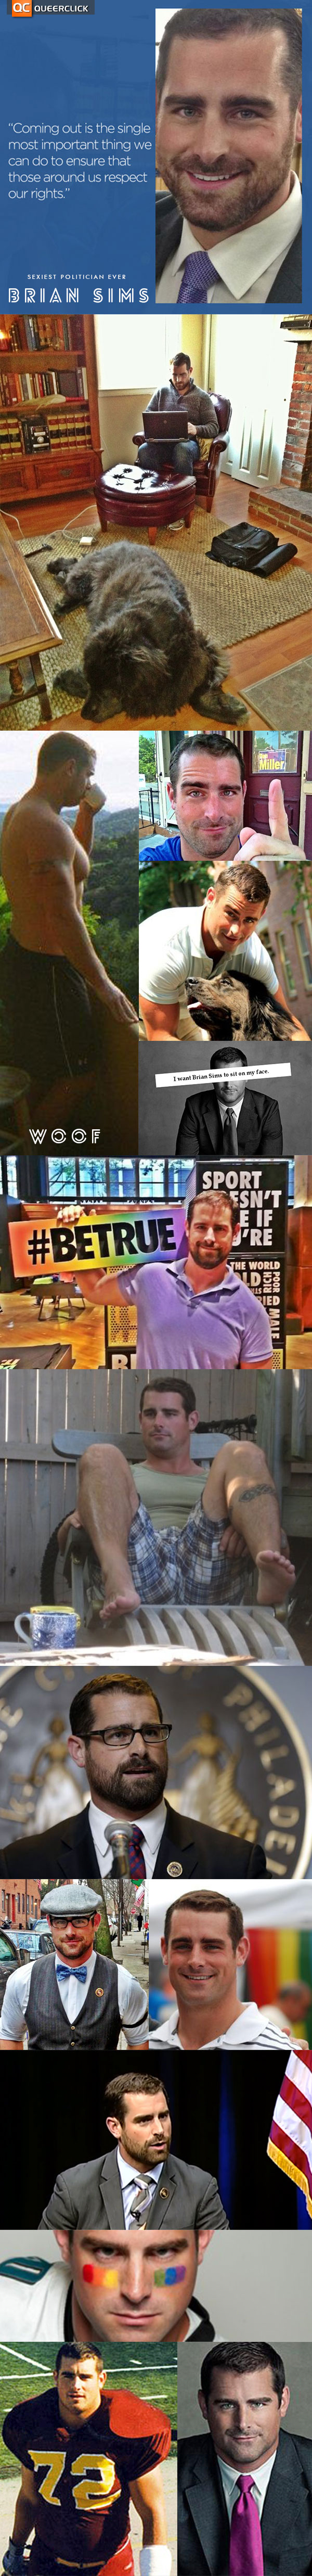 Sexiest Politician Ever - Brian Sims